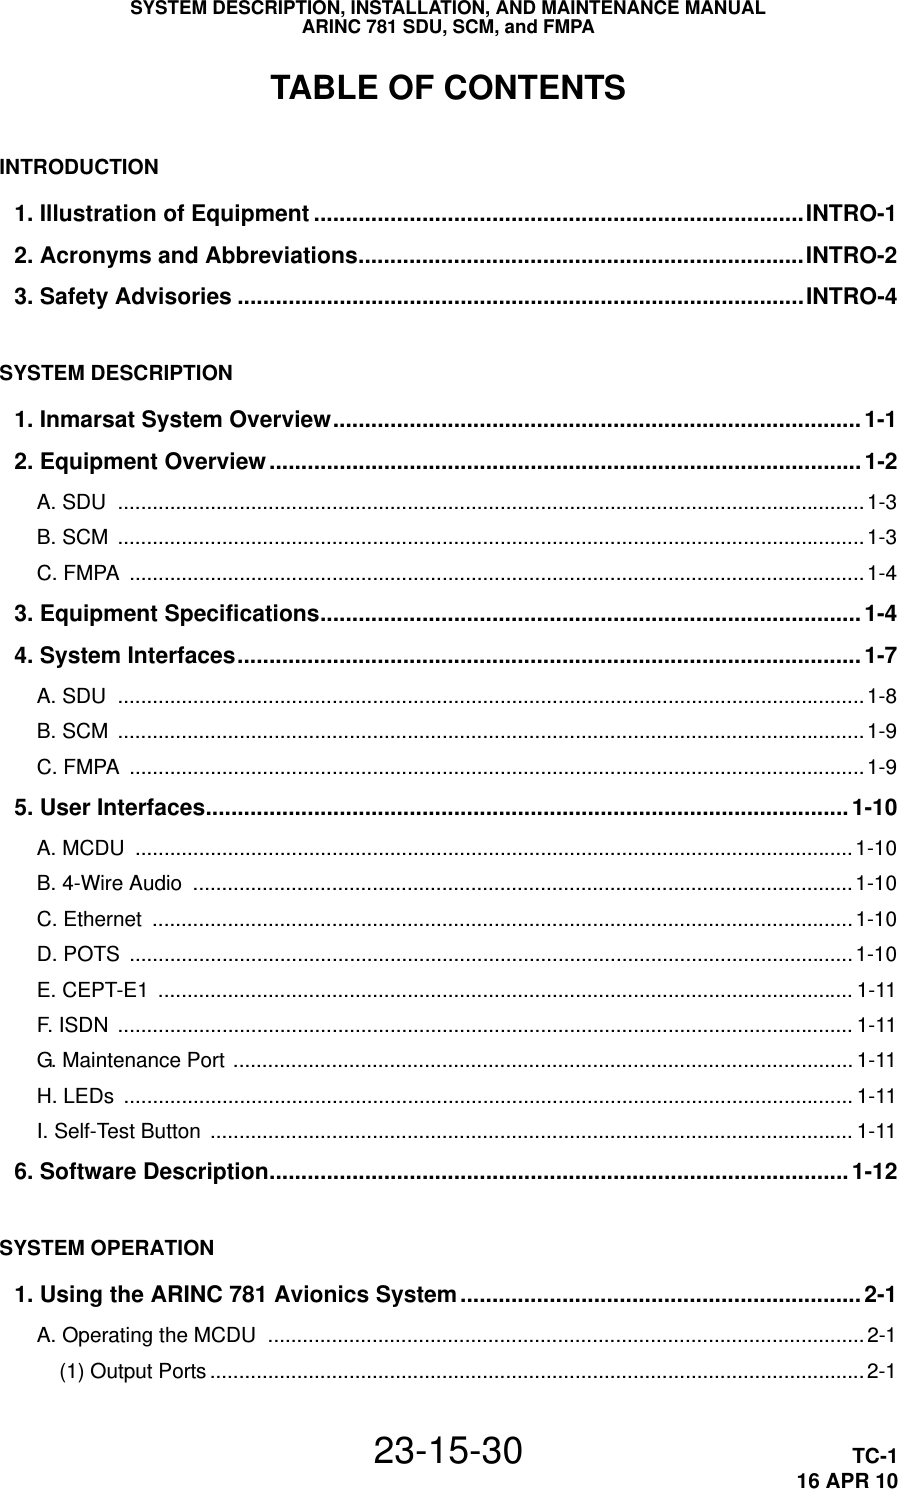 SYSTEM DESCRIPTION, INSTALLATION, AND MAINTENANCE MANUALARINC 781 SDU, SCM, and FMPA23-15-30 TC-116 APR 10TABLE OF CONTENTSINTRODUCTION1. Illustration of Equipment .............................................................................INTRO-12. Acronyms and Abbreviations......................................................................INTRO-23. Safety Advisories .........................................................................................INTRO-4SYSTEM DESCRIPTION1. Inmarsat System Overview................................................................................... 1-12. Equipment Overview............................................................................................. 1-2A. SDU  ................................................................................................................................. 1-3B. SCM  ................................................................................................................................. 1-3C. FMPA  ............................................................................................................................... 1-43. Equipment Specifications.....................................................................................1-44. System Interfaces.................................................................................................. 1-7A. SDU  ................................................................................................................................. 1-8B. SCM  ................................................................................................................................. 1-9C. FMPA  ............................................................................................................................... 1-95. User Interfaces..................................................................................................... 1-10A. MCDU  ............................................................................................................................1-10B. 4-Wire Audio  .................................................................................................................. 1-10C. Ethernet  ......................................................................................................................... 1-10D. POTS  .............................................................................................................................1-10E. CEPT-E1  ........................................................................................................................ 1-11F. ISDN  ............................................................................................................................... 1-11G. Maintenance Port ........................................................................................................... 1-11H. LEDs  .............................................................................................................................. 1-11I. Self-Test Button  ............................................................................................................... 1-116. Software Description...........................................................................................1-12SYSTEM OPERATION1. Using the ARINC 781 Avionics System............................................................... 2-1A. Operating the MCDU  ....................................................................................................... 2-1(1) Output Ports .................................................................................................................2-1